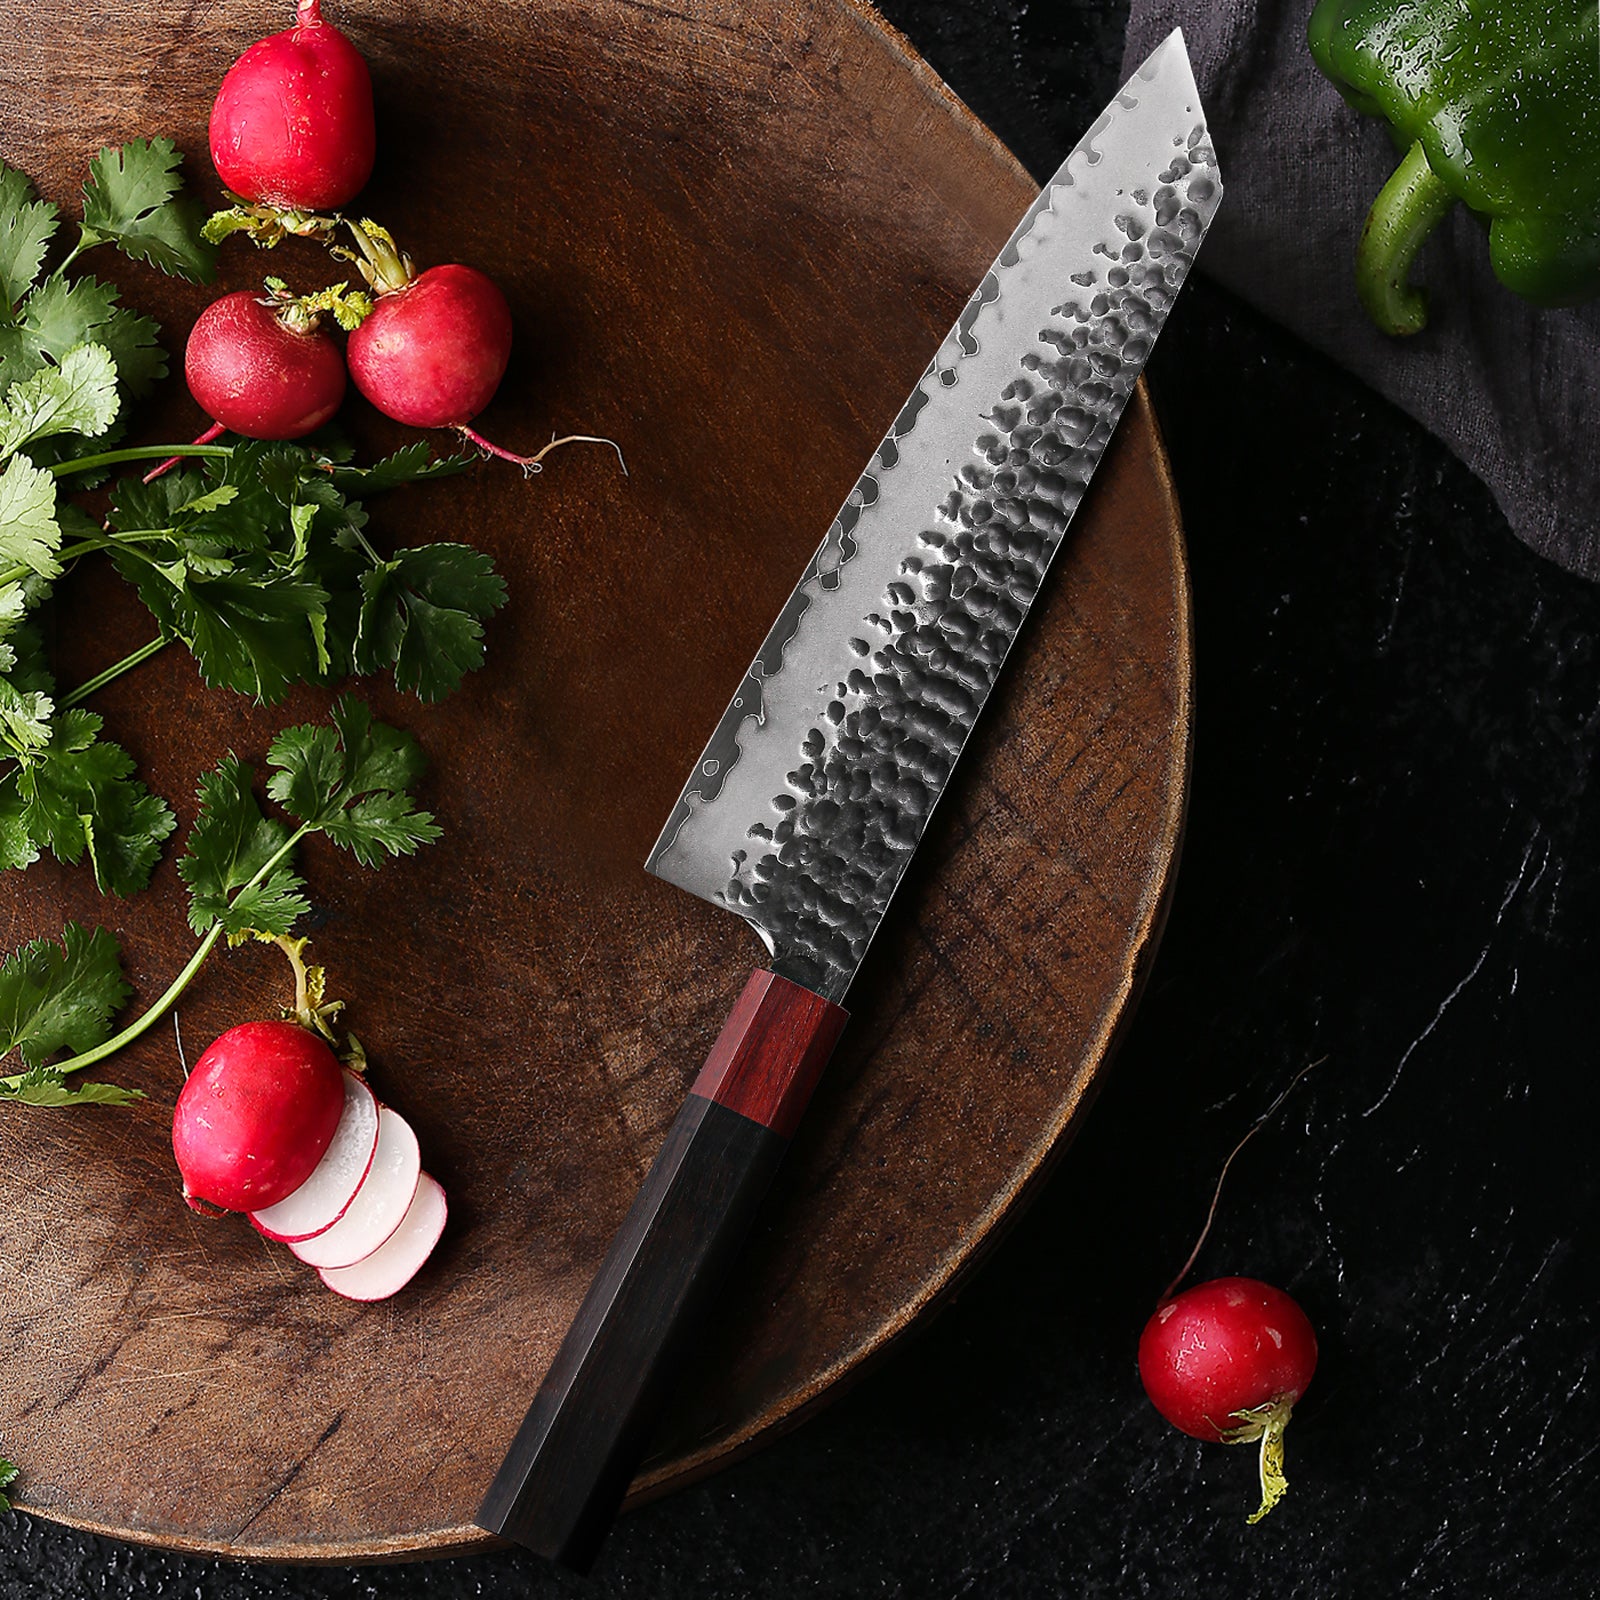 Razor Sharp 8 Inch Cooking Knife for Inch Perfect Precision